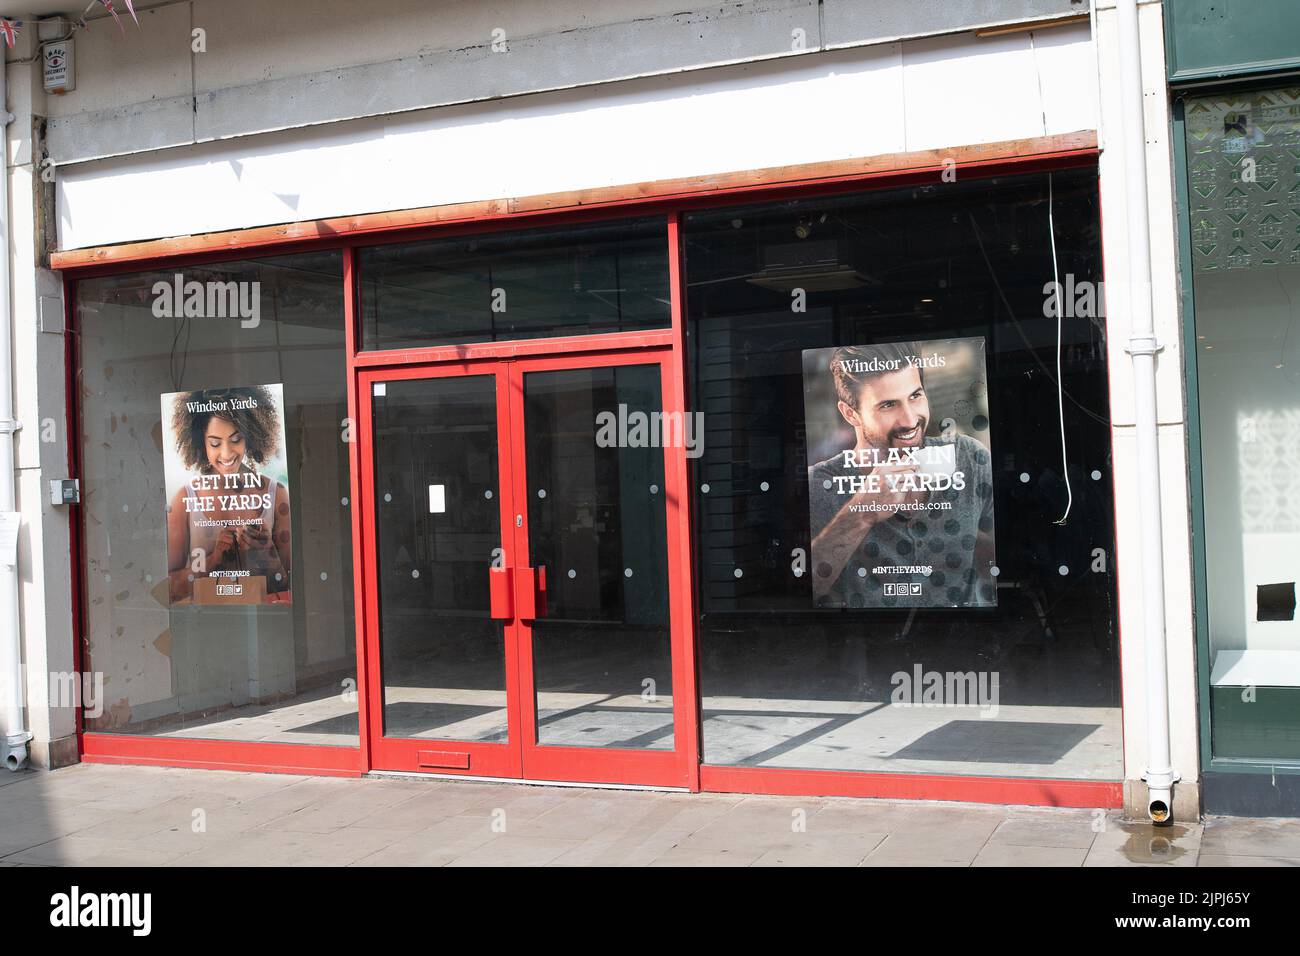 Windsor, Berkshire, UK. 18th August, 2022. The Clintons card shop in the Windsor Yards shopping centre has now closed down leaving more empty retail units in the town. Credit: Maureen McLean/Alamy Stock Photo